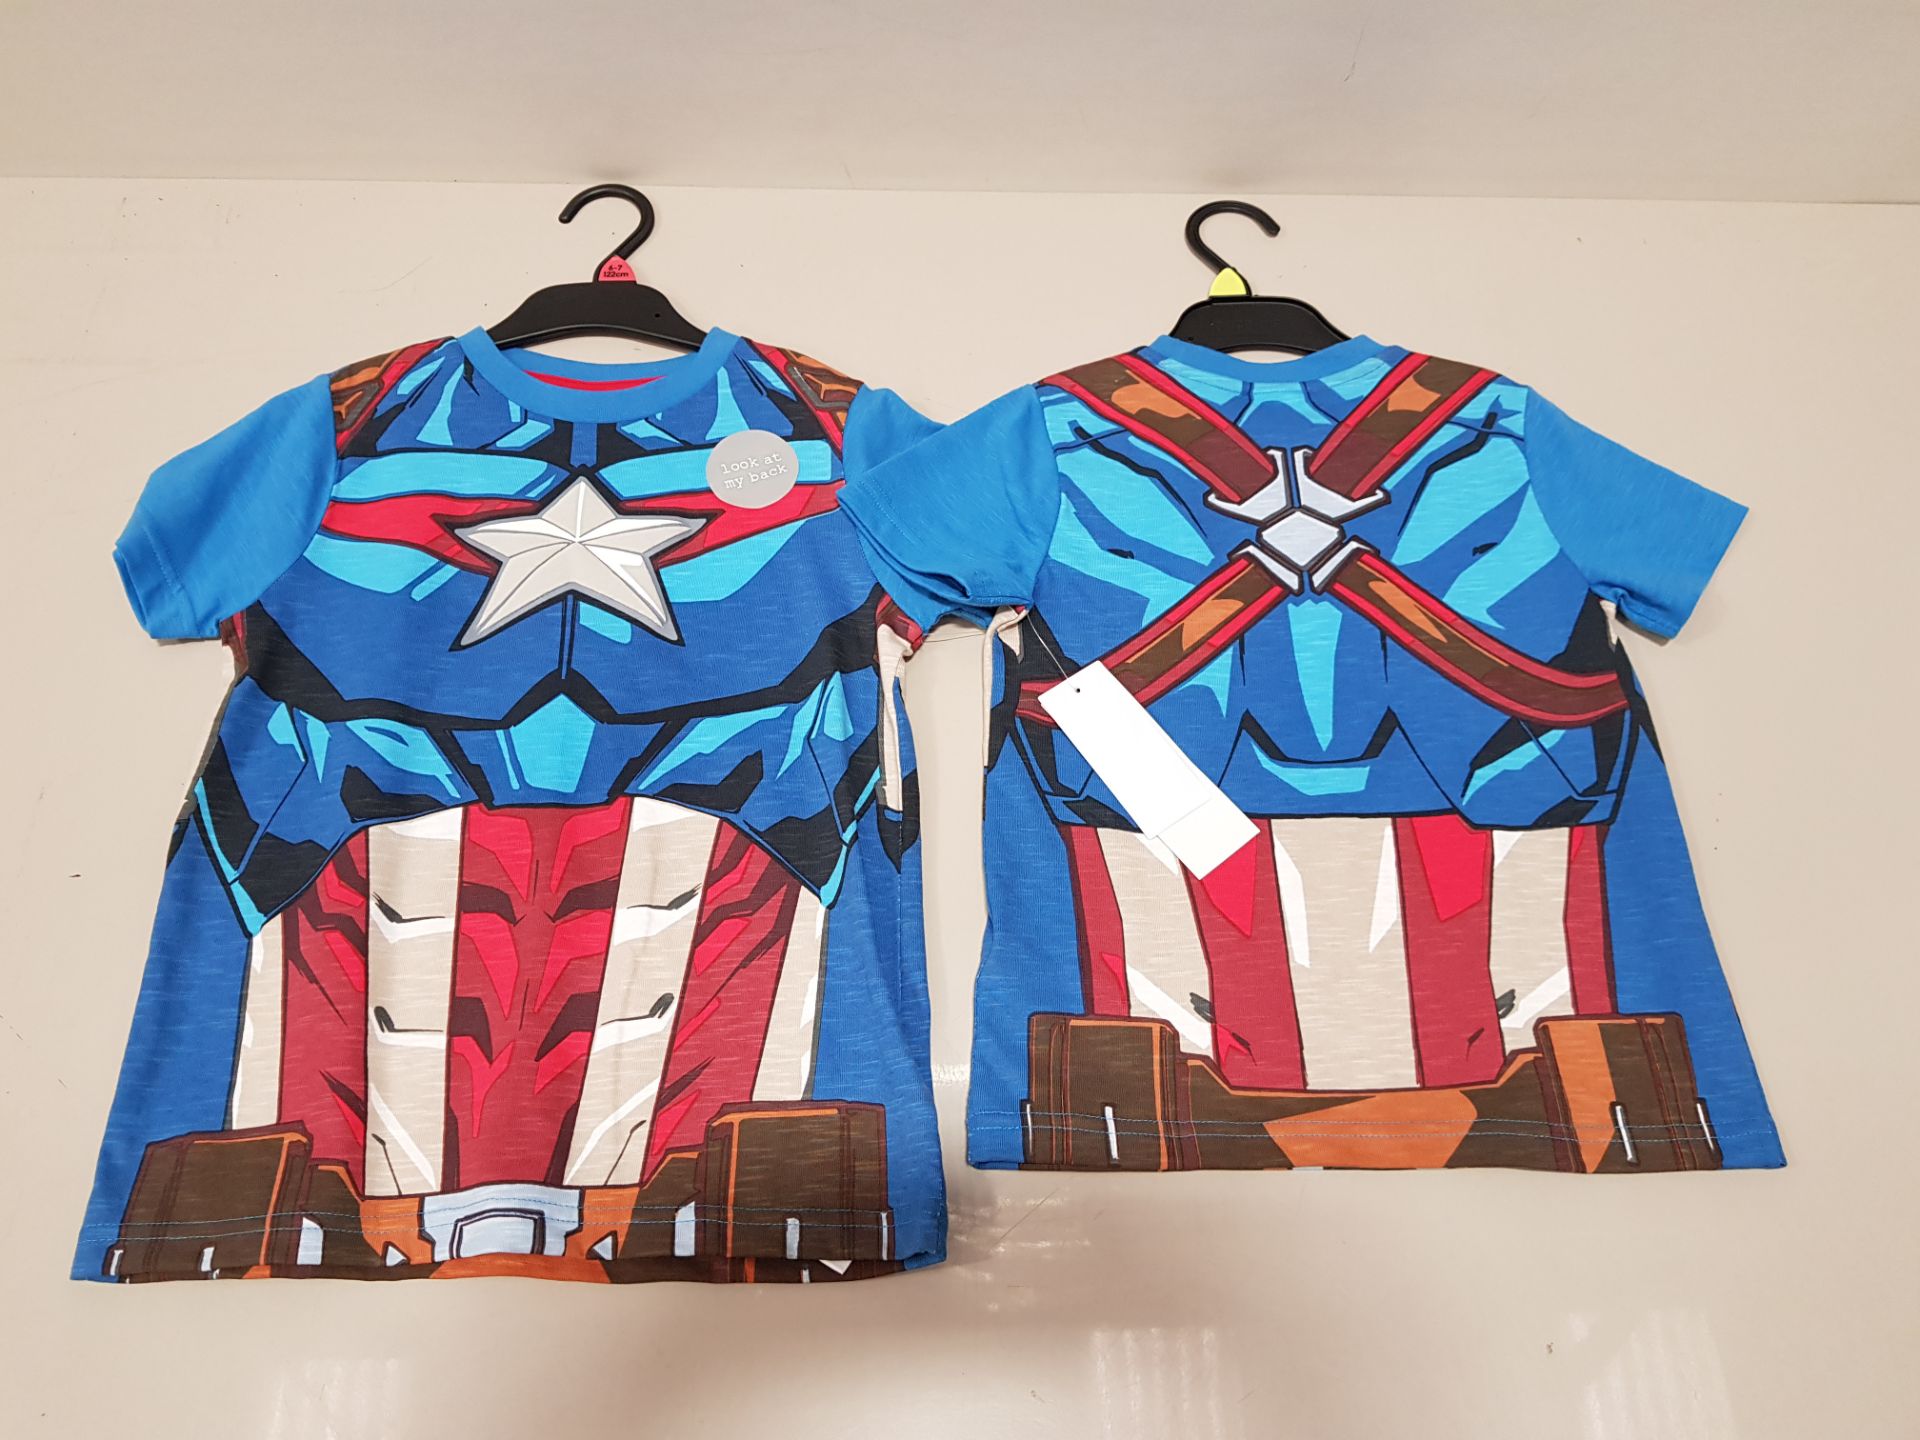 APPROX 50 X BRAND NEW MARVEL AVENGERS BOYS T-SHIRTS IN DIFFERENT SIZES